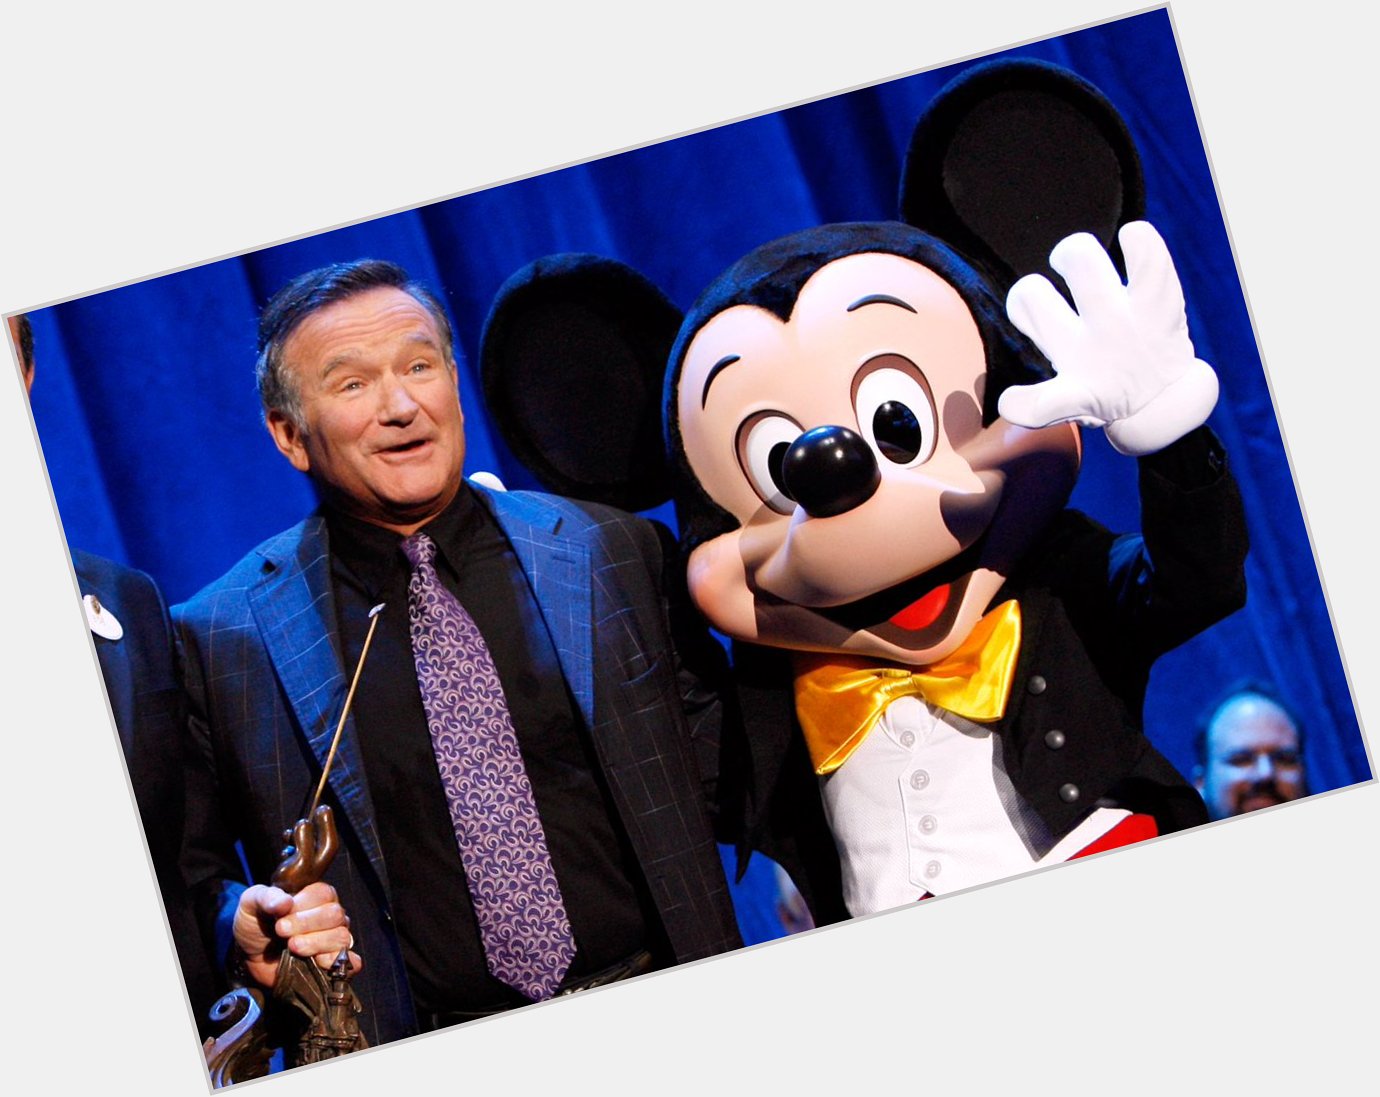 Happy birthday to the late comedic genius and Disney Legend, Robin Williams! 